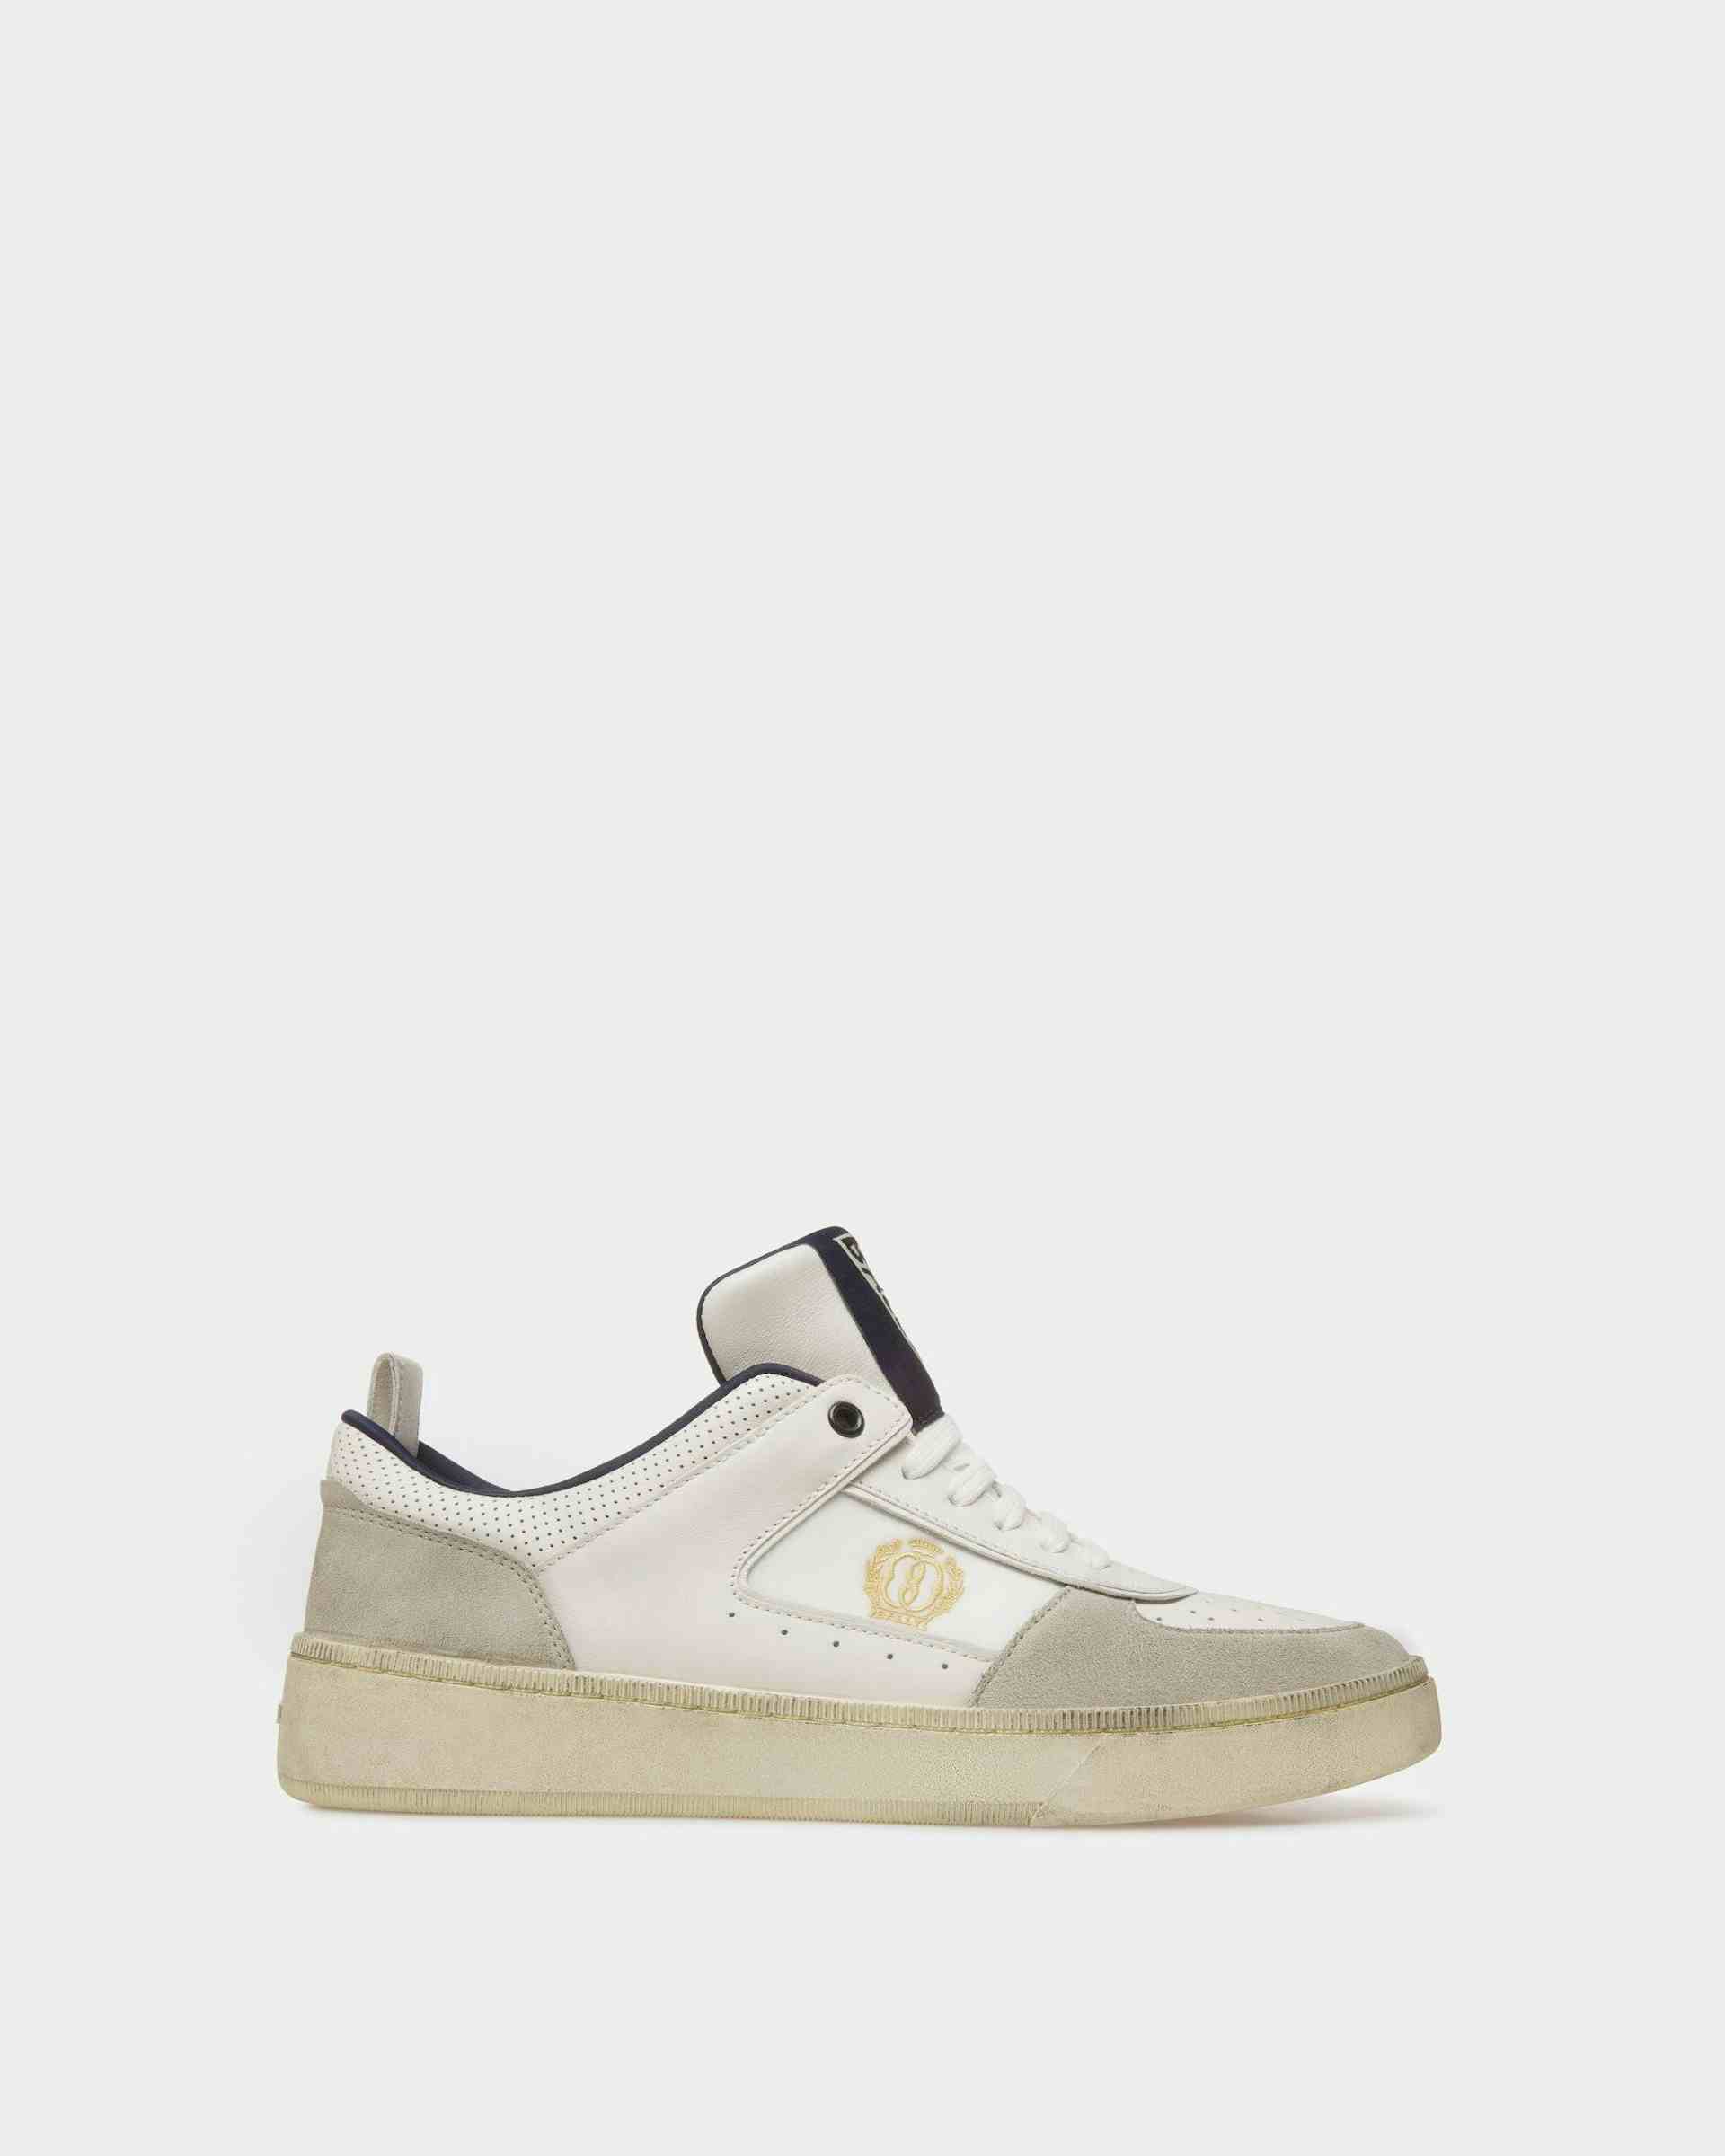 Raise Sneakers In Dusty White And Midnight Leather And Fabric - Men's - Bally